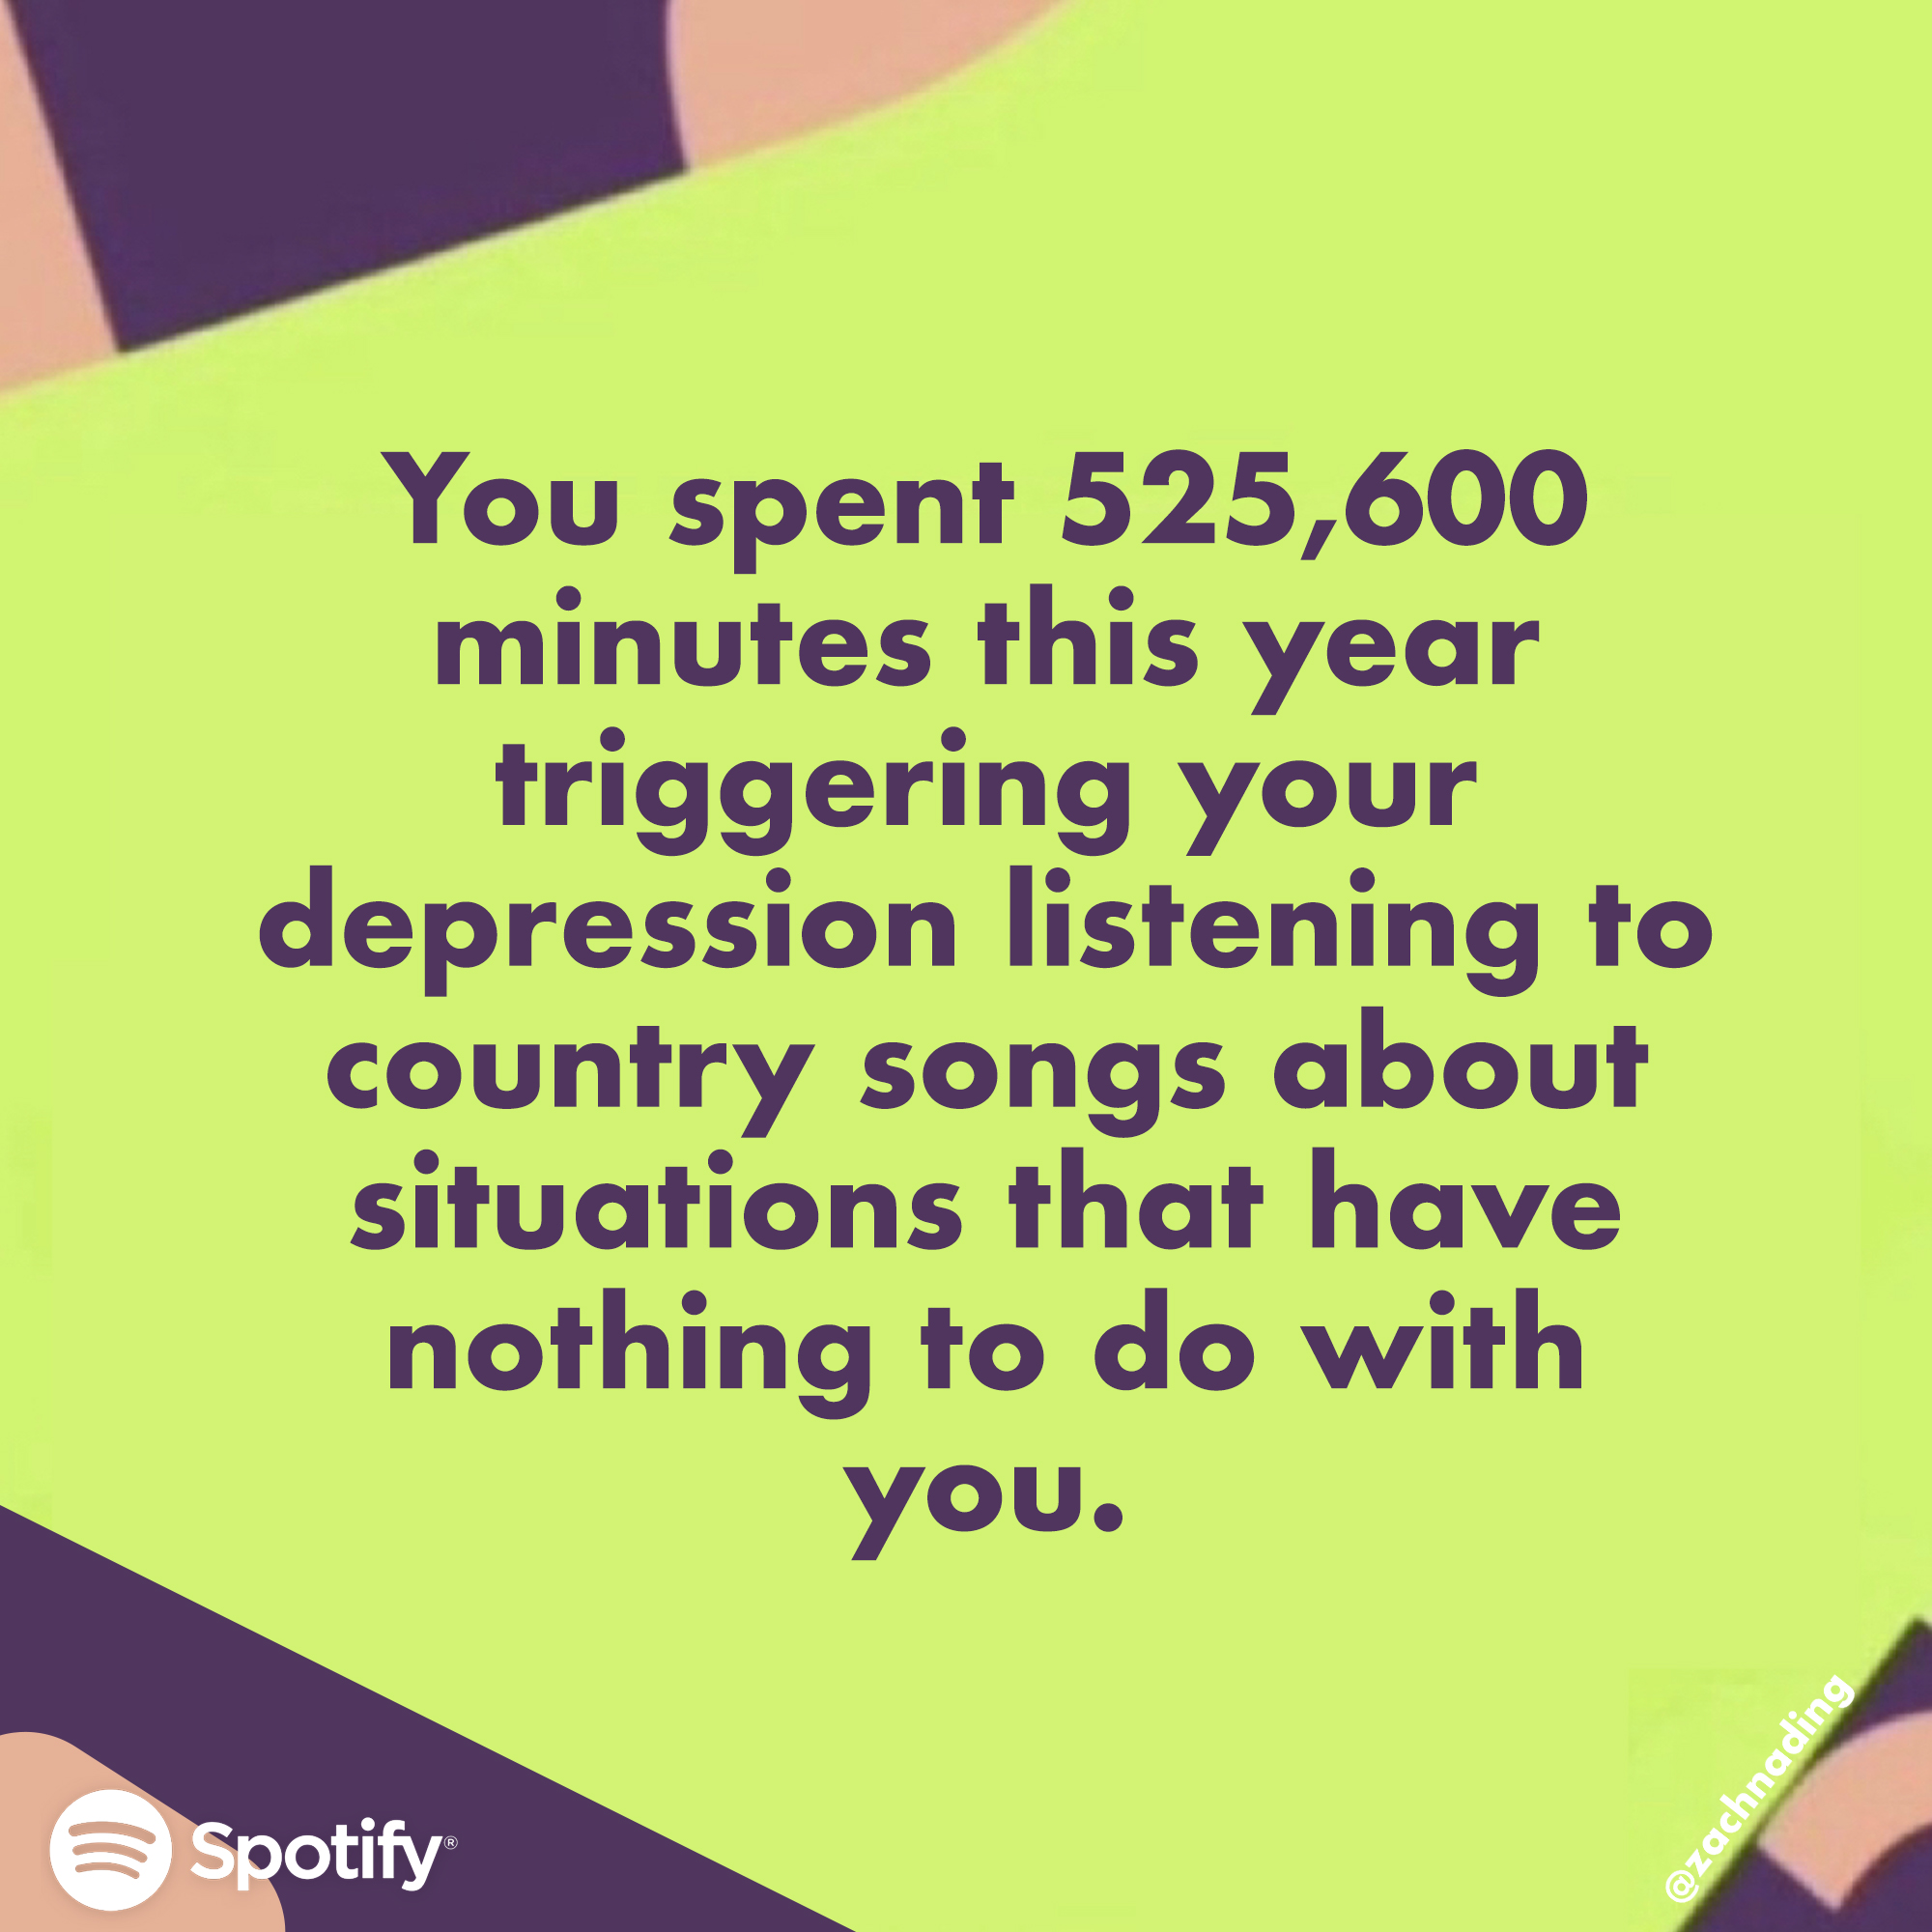 Spotify Wrapped Memes - hey arnold skirt - You spent 525,600 minutes this year triggering your depression listening to country songs about situations that have nothing to do with you. Spotify Burposporo